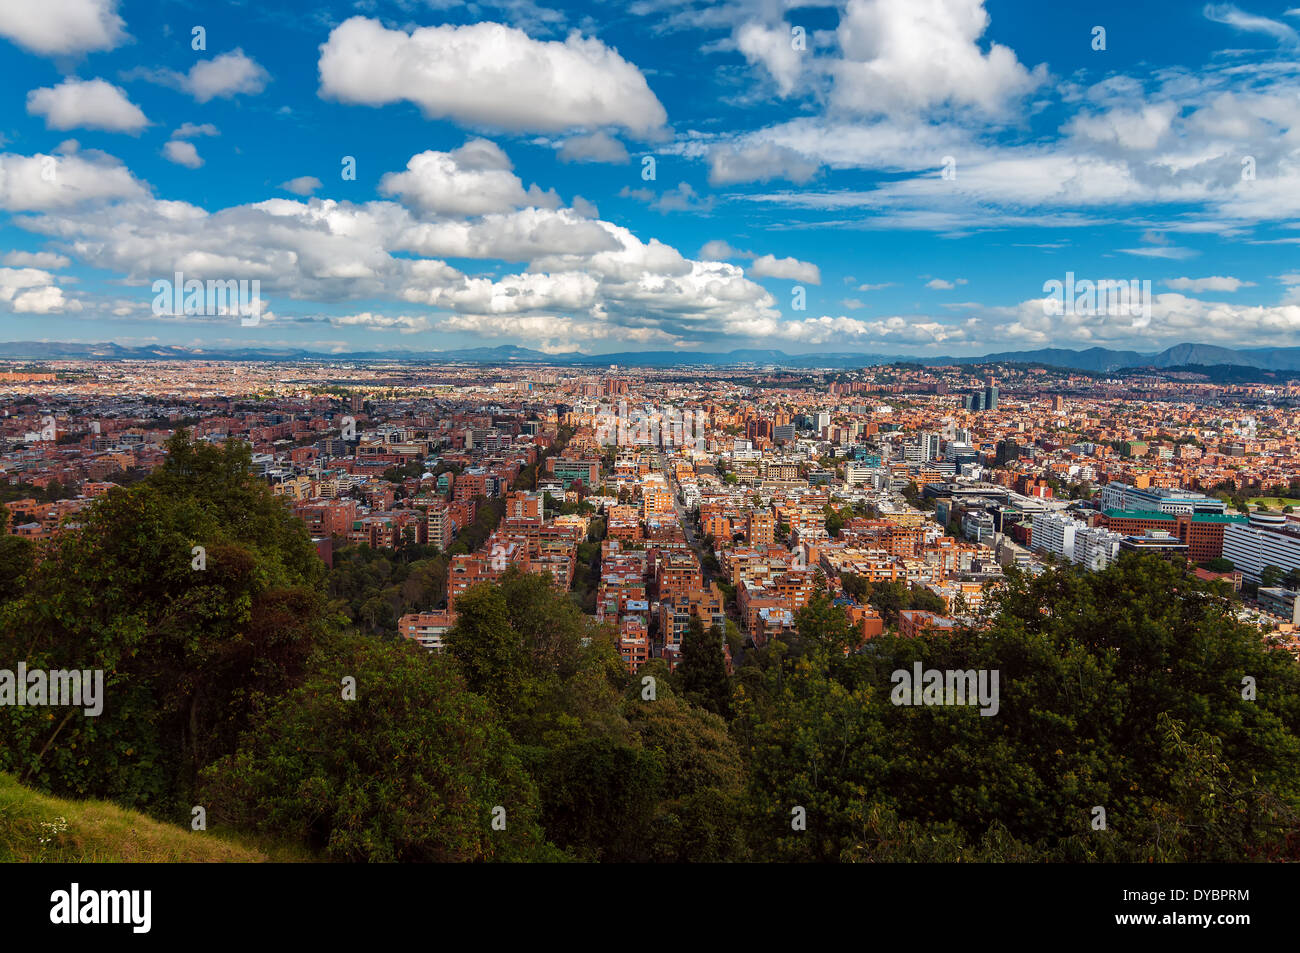 View of Bogota, Colombia under a beautiful deep blue sky Stock Photo